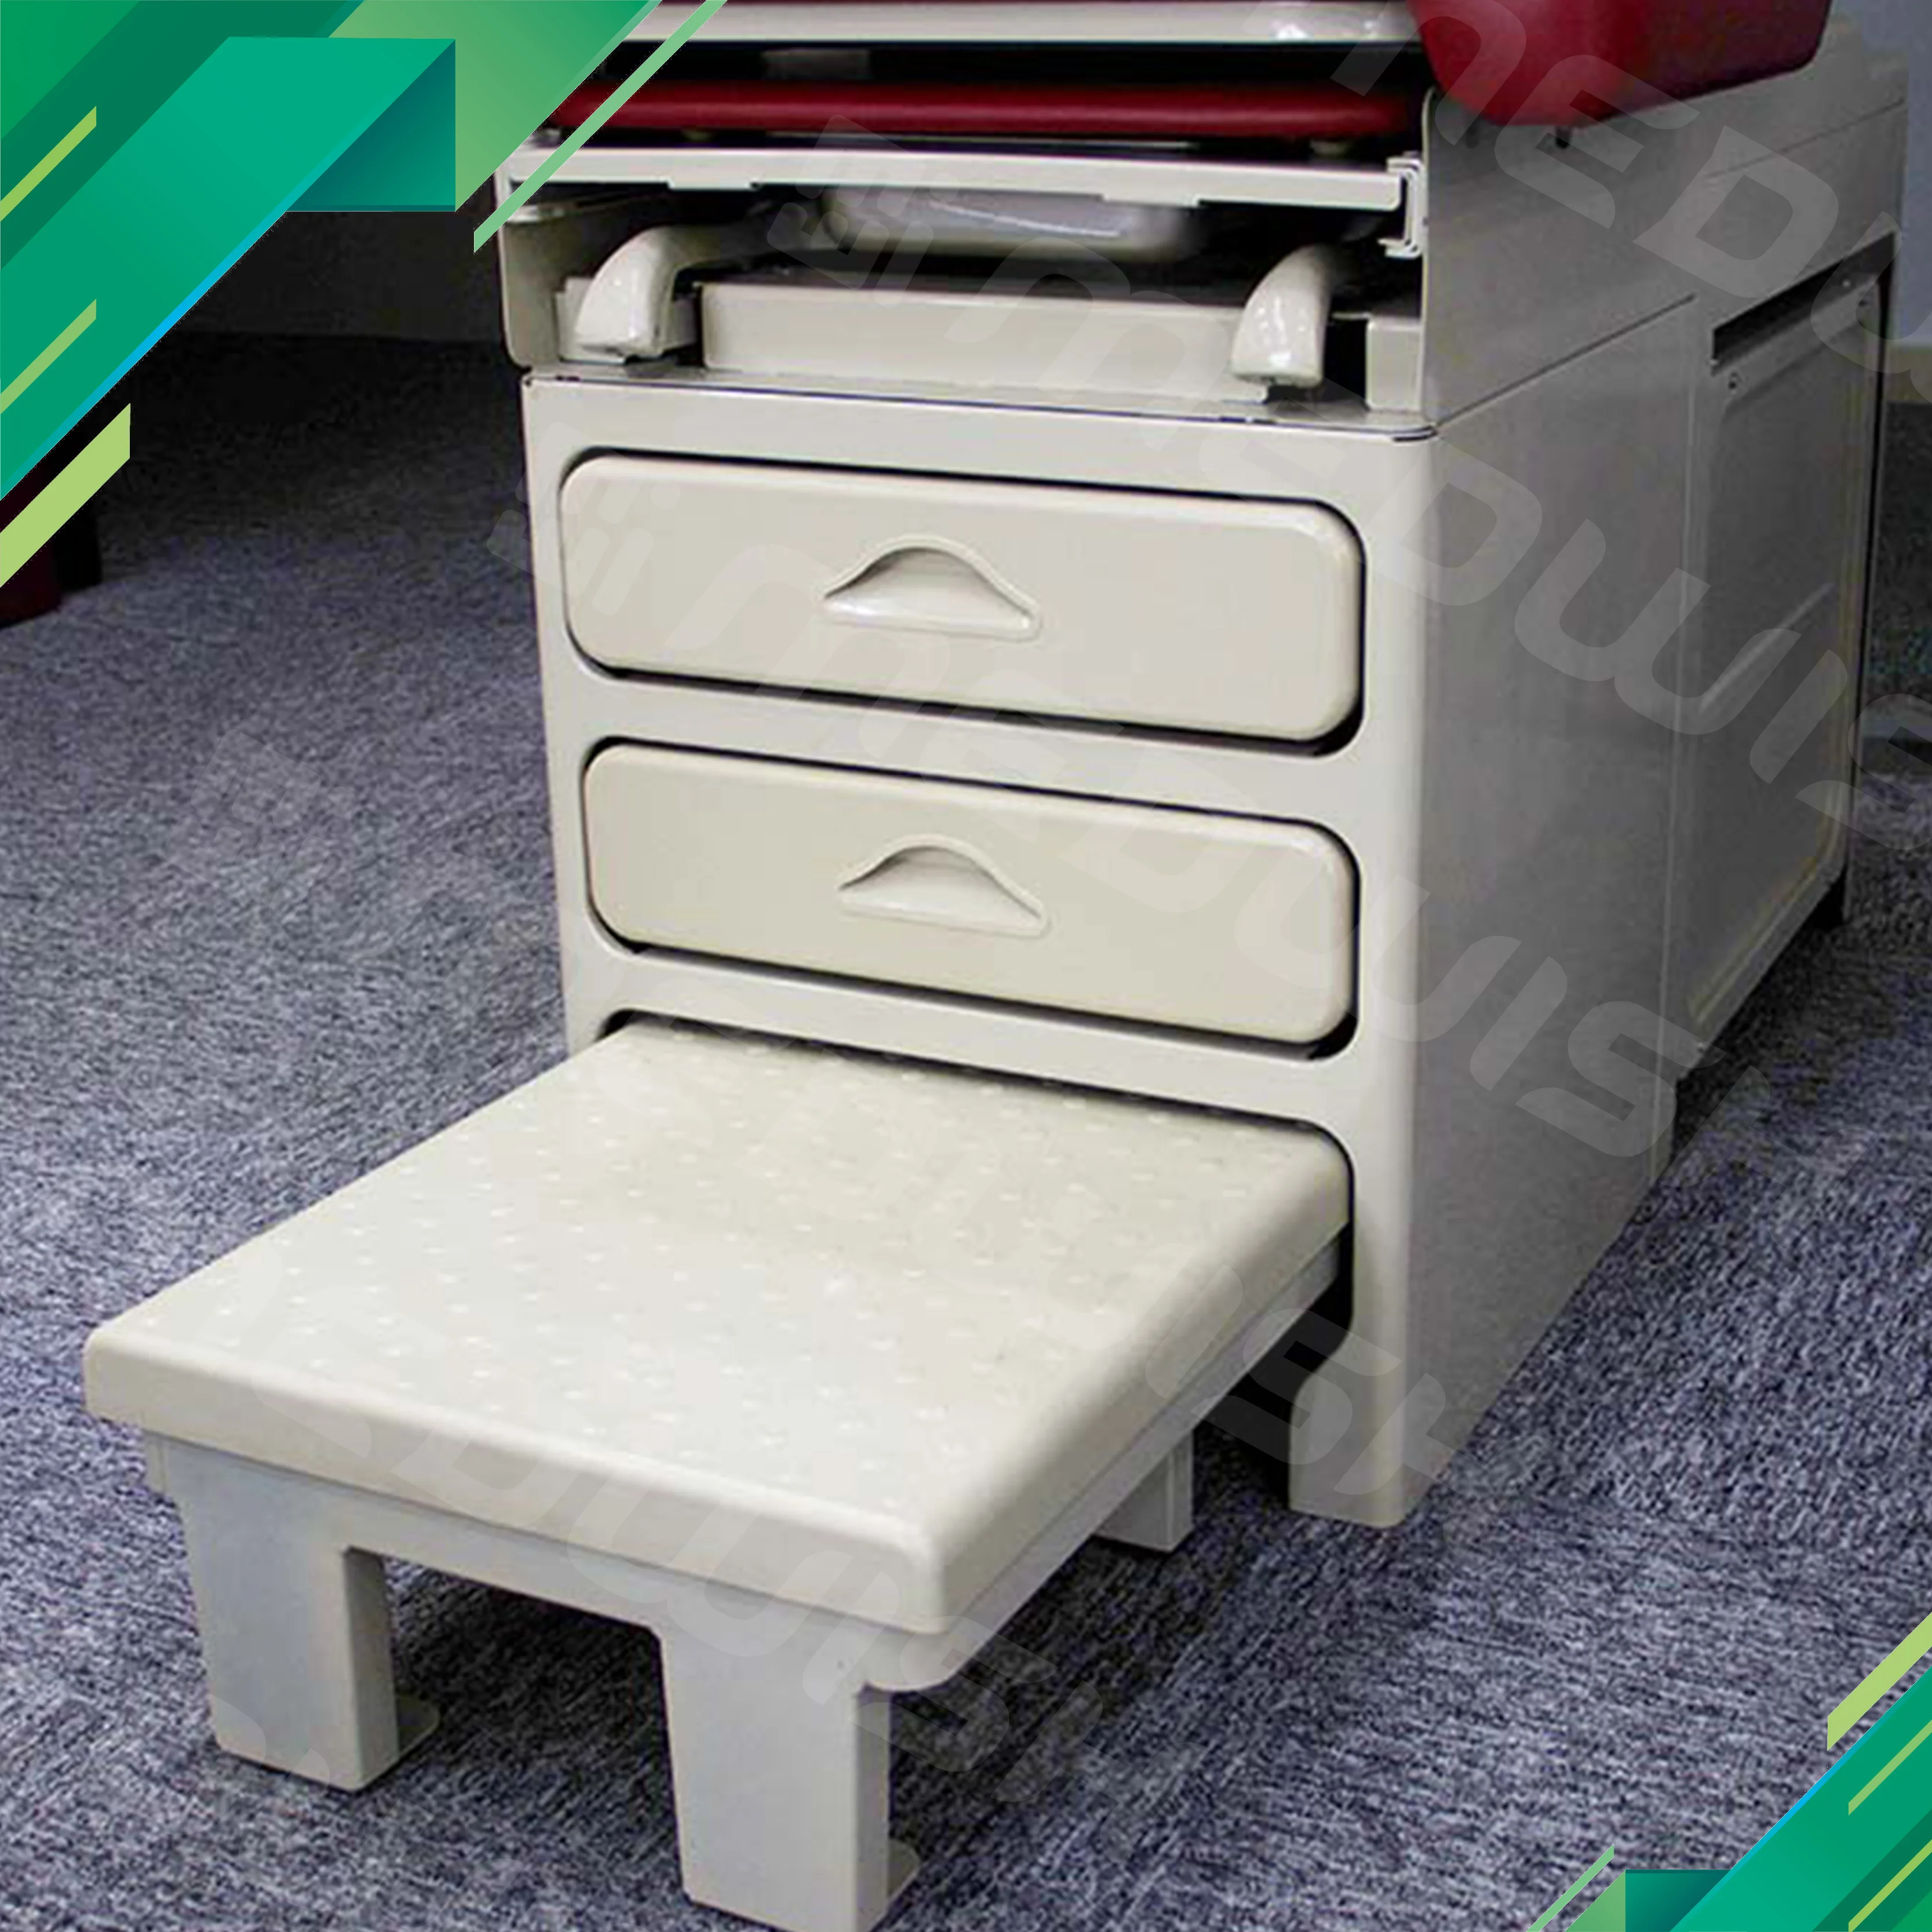 
Manufacturer medical hospital equipment surgical instruments examination table gynecology exam table with storage drawer 